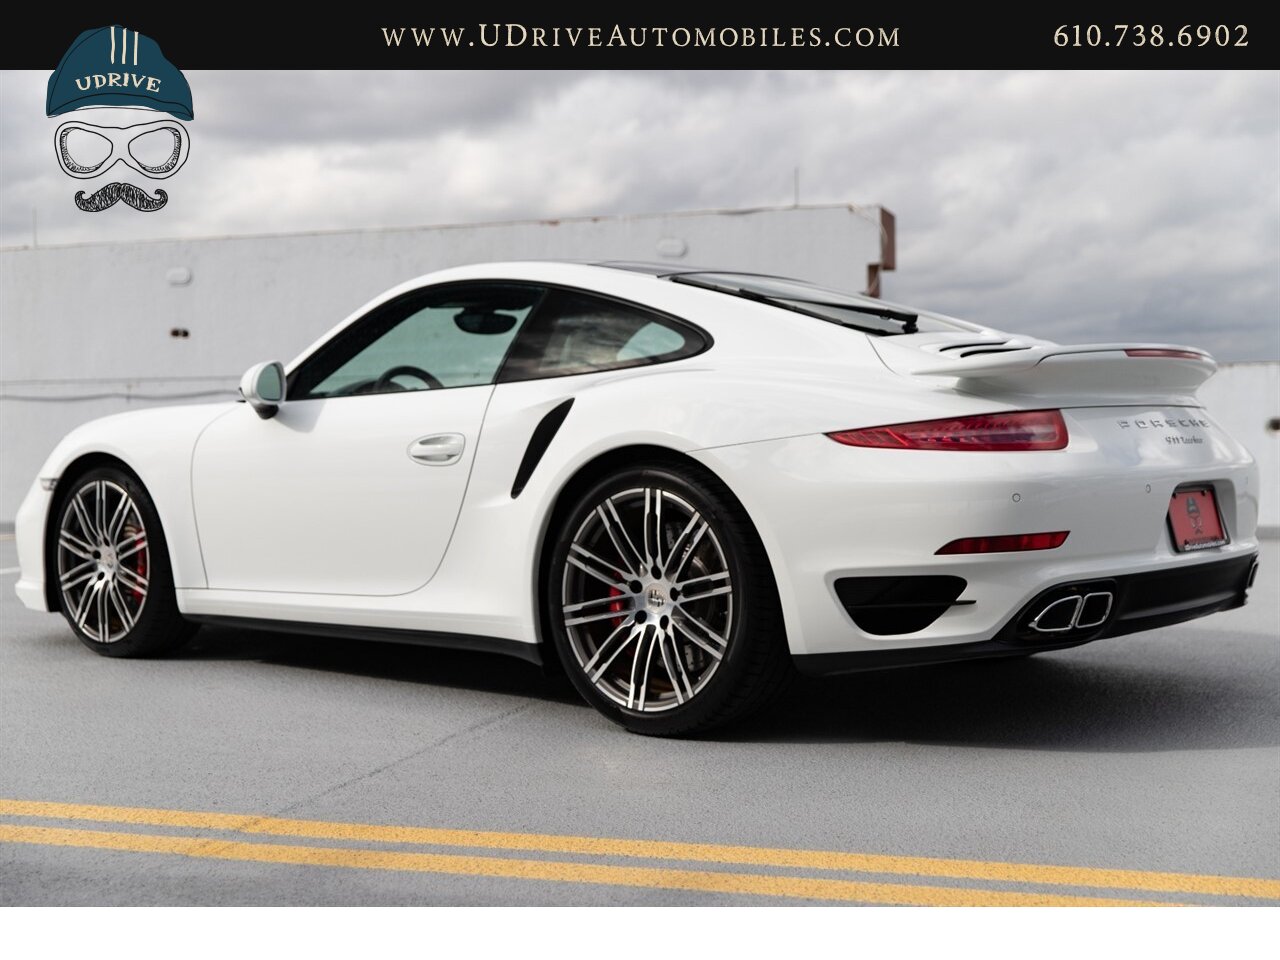 2014 Porsche 911 Turbo 12k Miles White over Black Chrono Rear Wiper  Sport Seats 20in Turbo Whls Sunroof Red Belts - Photo 21 - West Chester, PA 19382